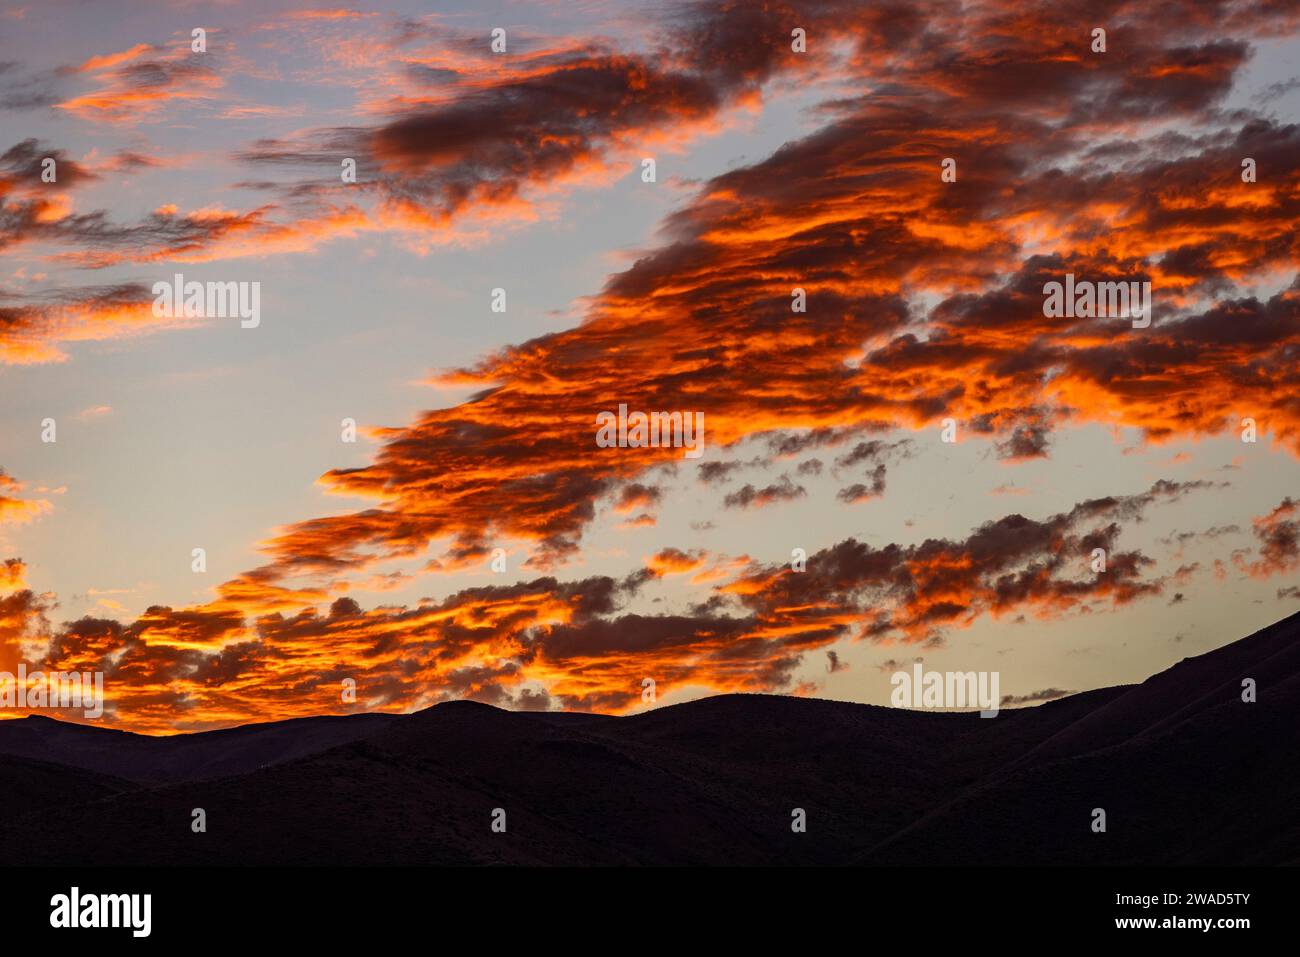 Silhouette of mountains with sunrise in background Stock Photo